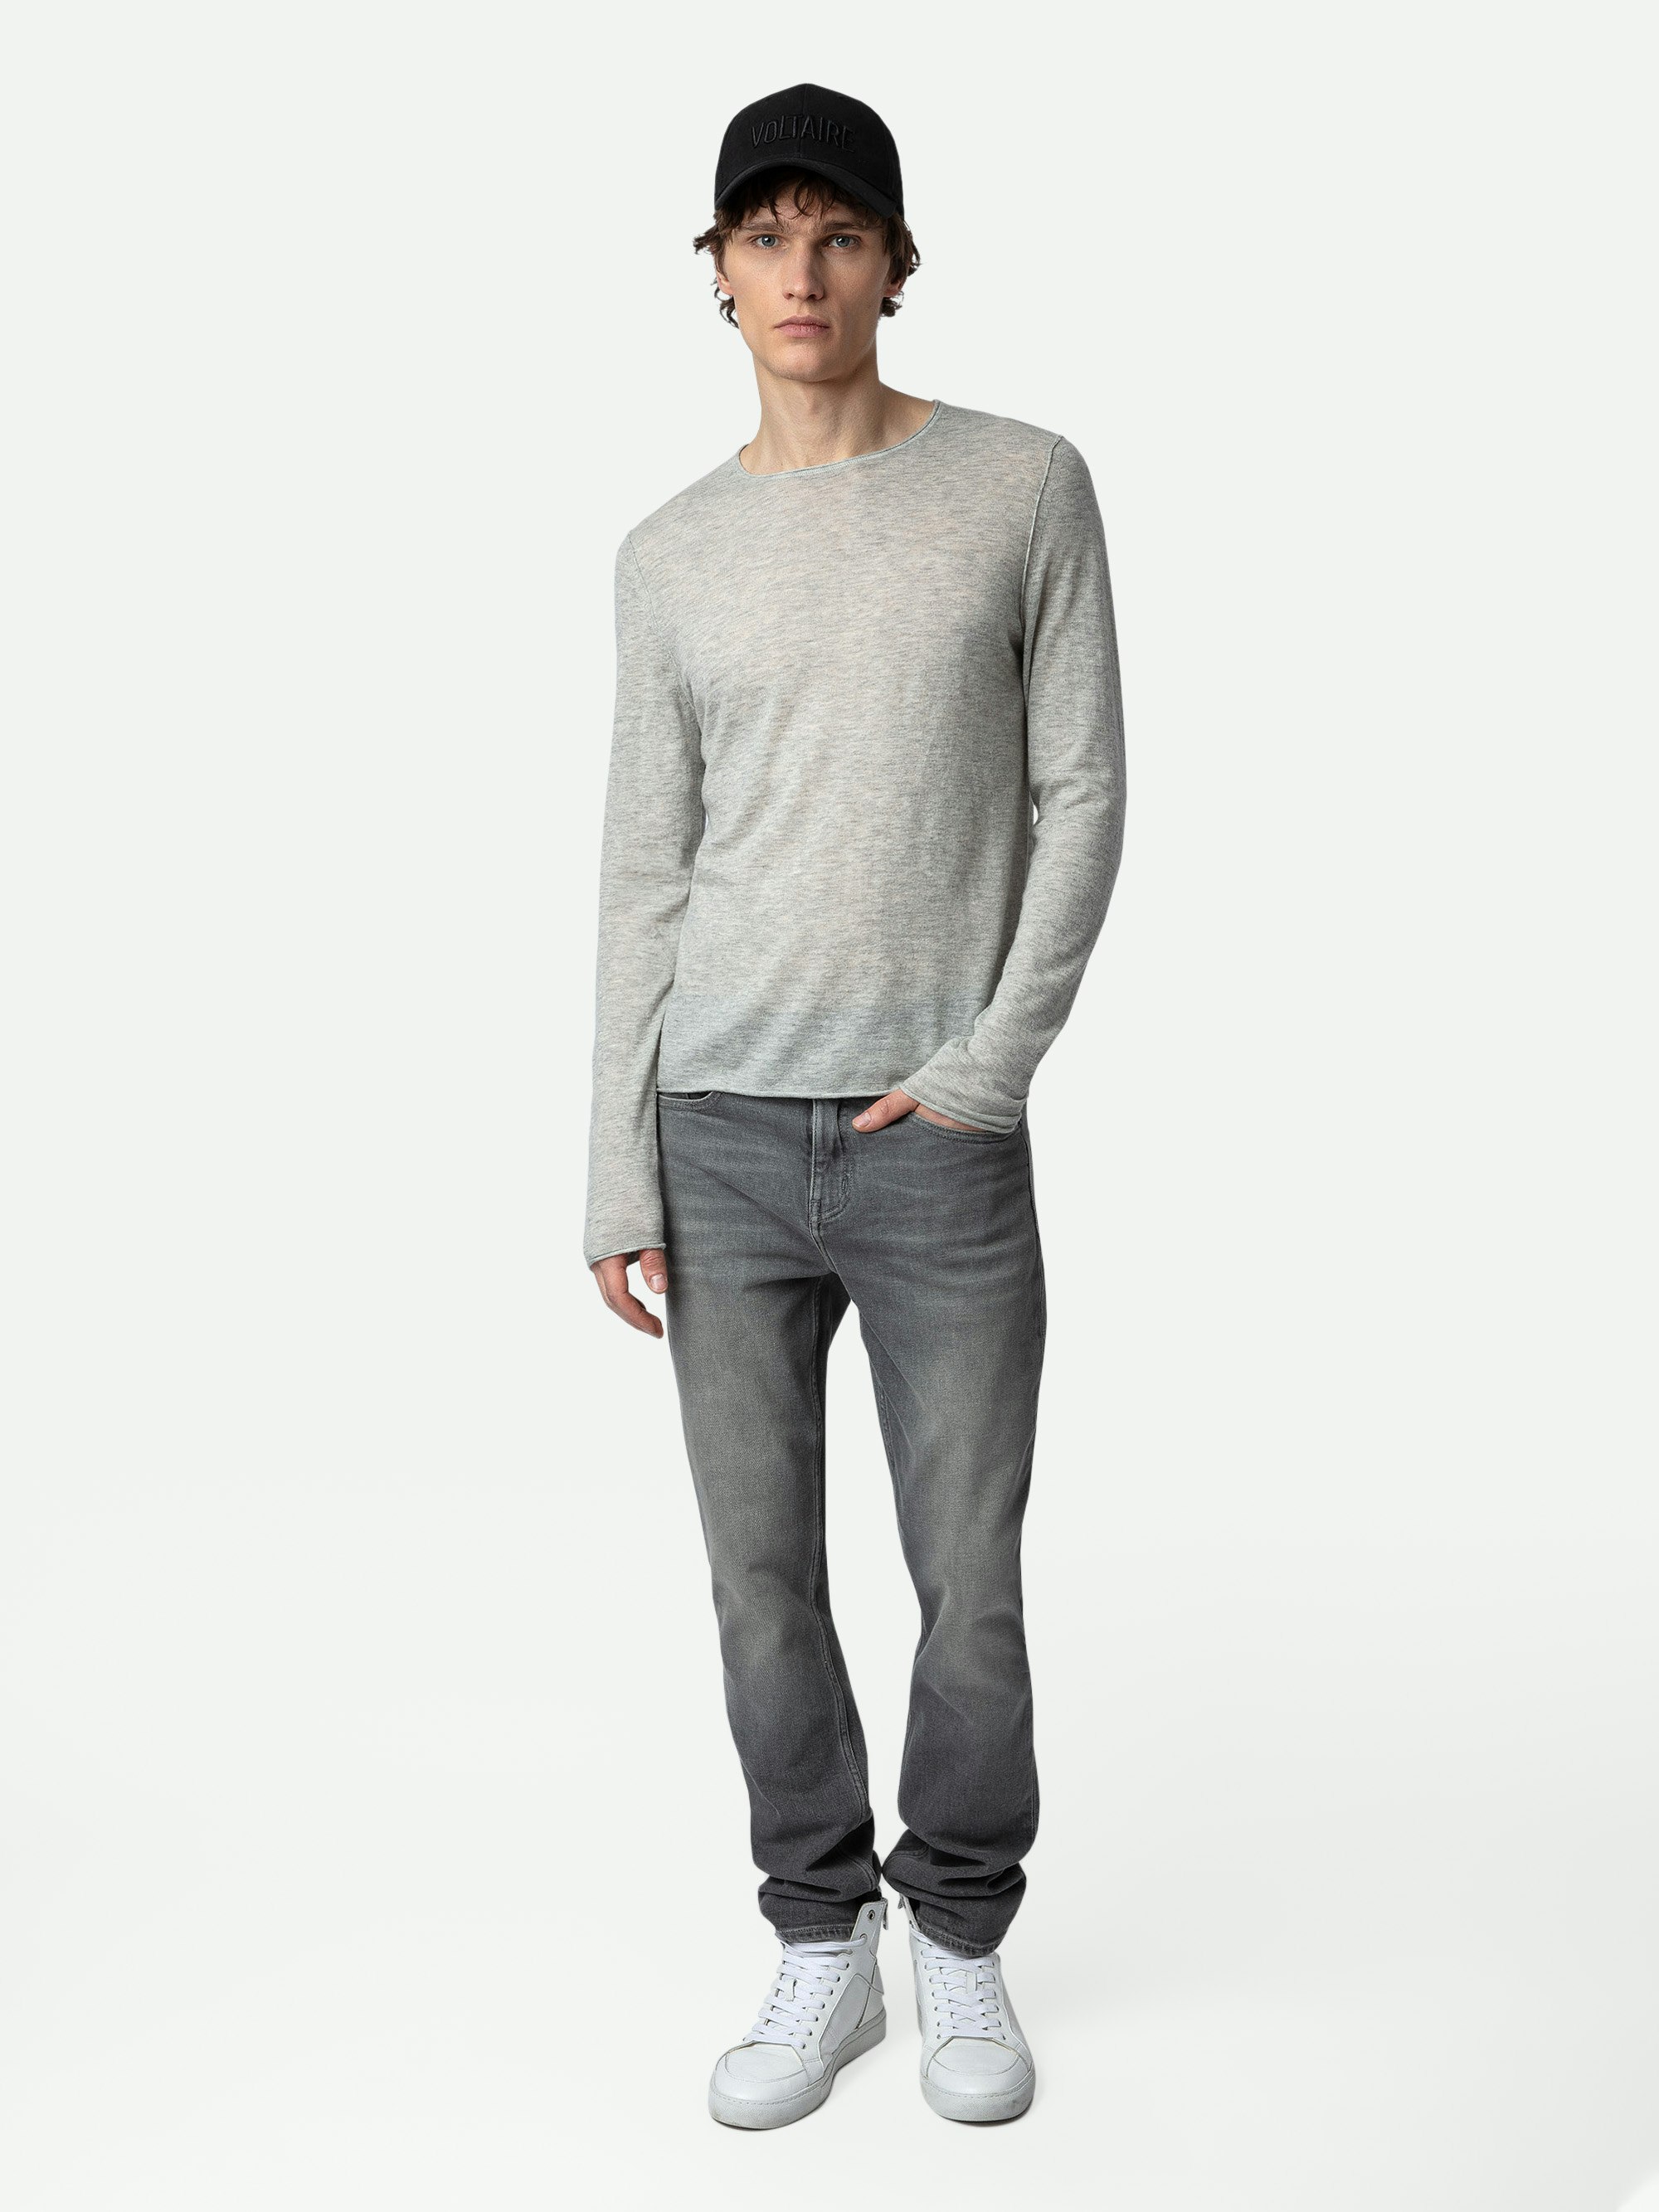 Teiss Cashmere Sweater - Men's grey light cashmere sweater.